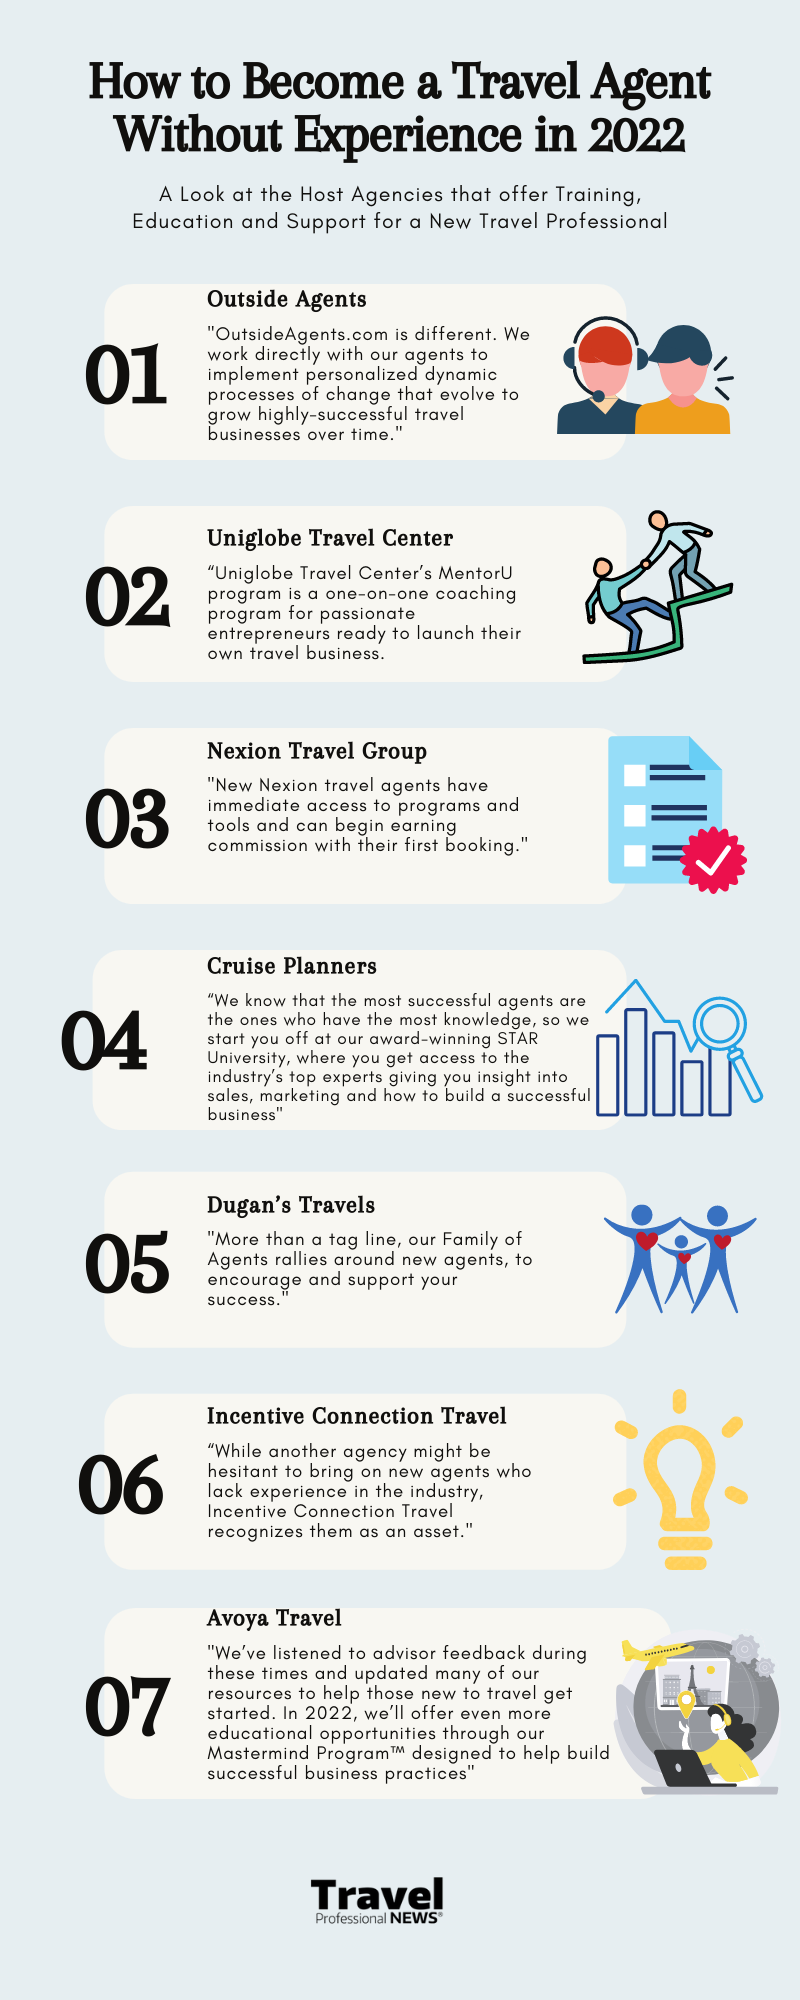 How-to-Become-a-Travel-Agent-Without-Experience-in-2022-Infographic-TPN